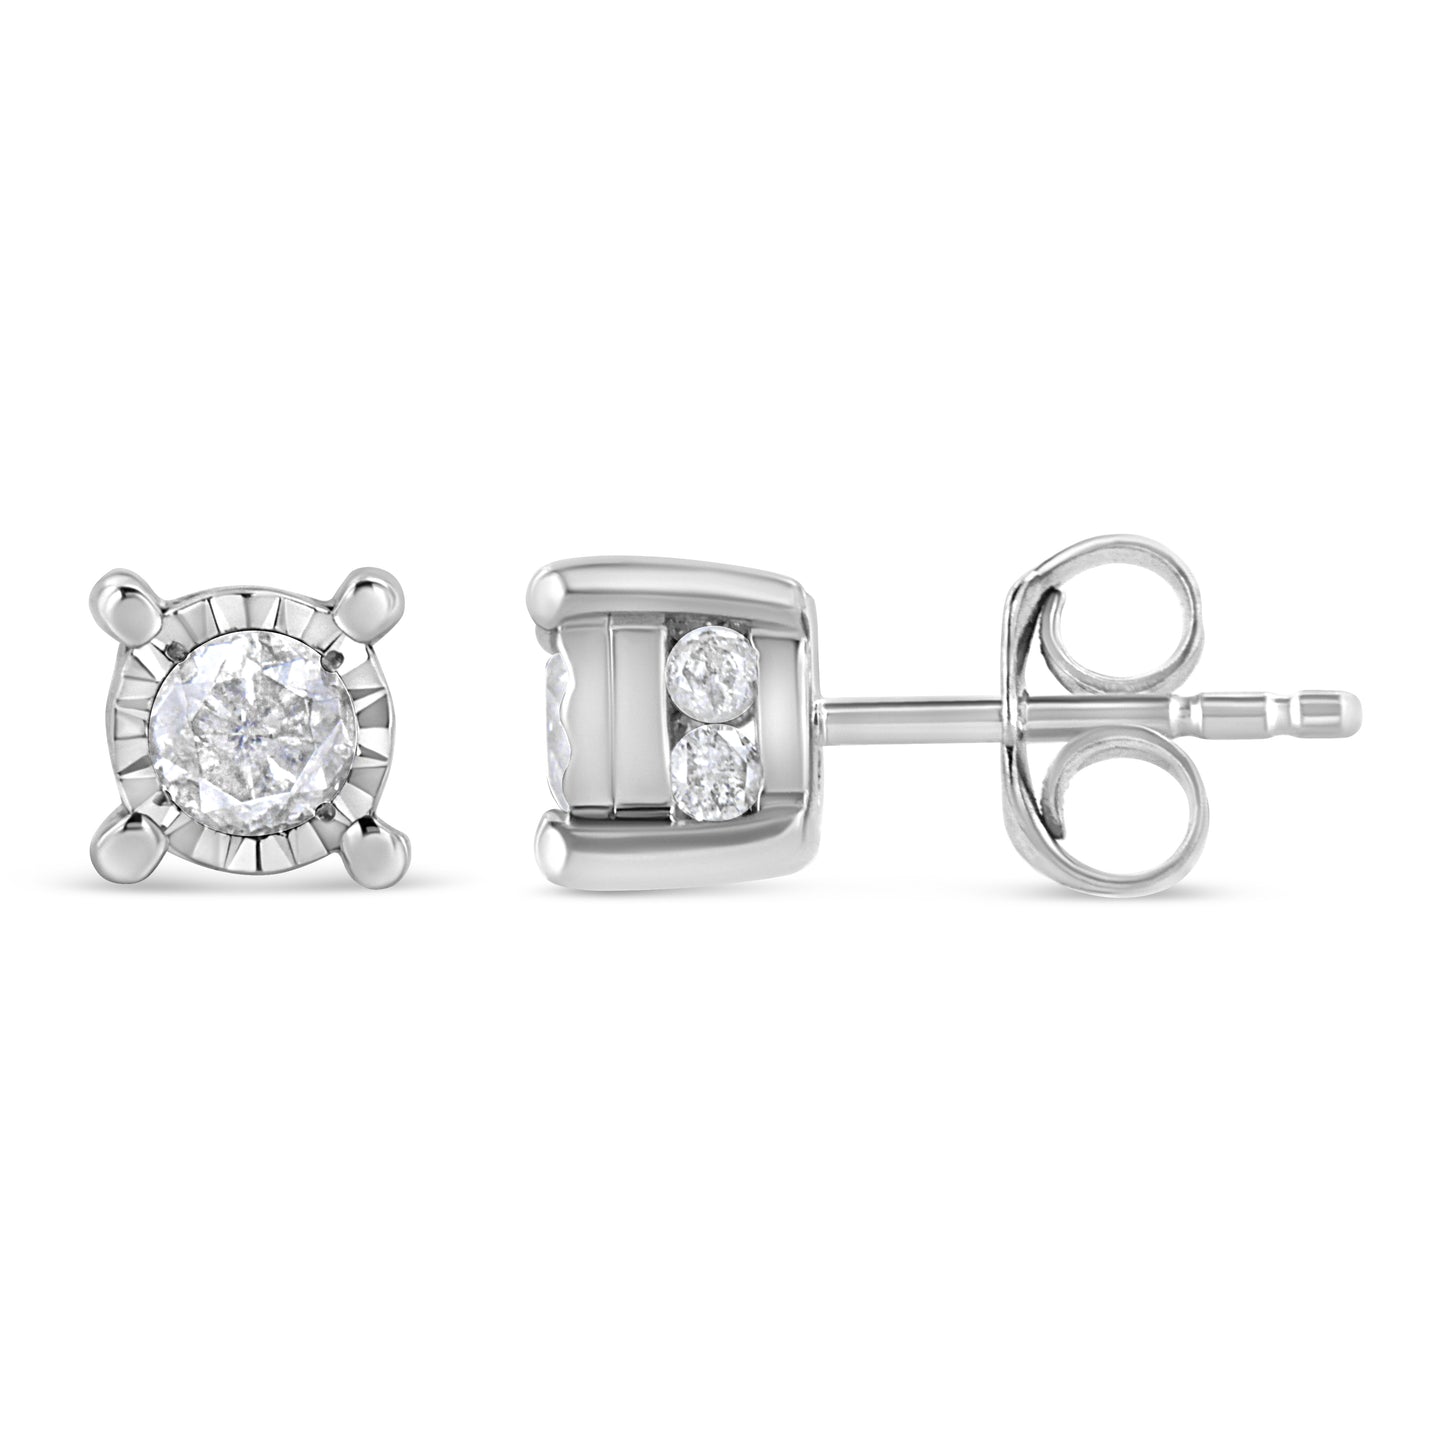 1.00 cttw Round Brilliant-Cut Diamond Miracle-Set Solitaire Stud Earrings